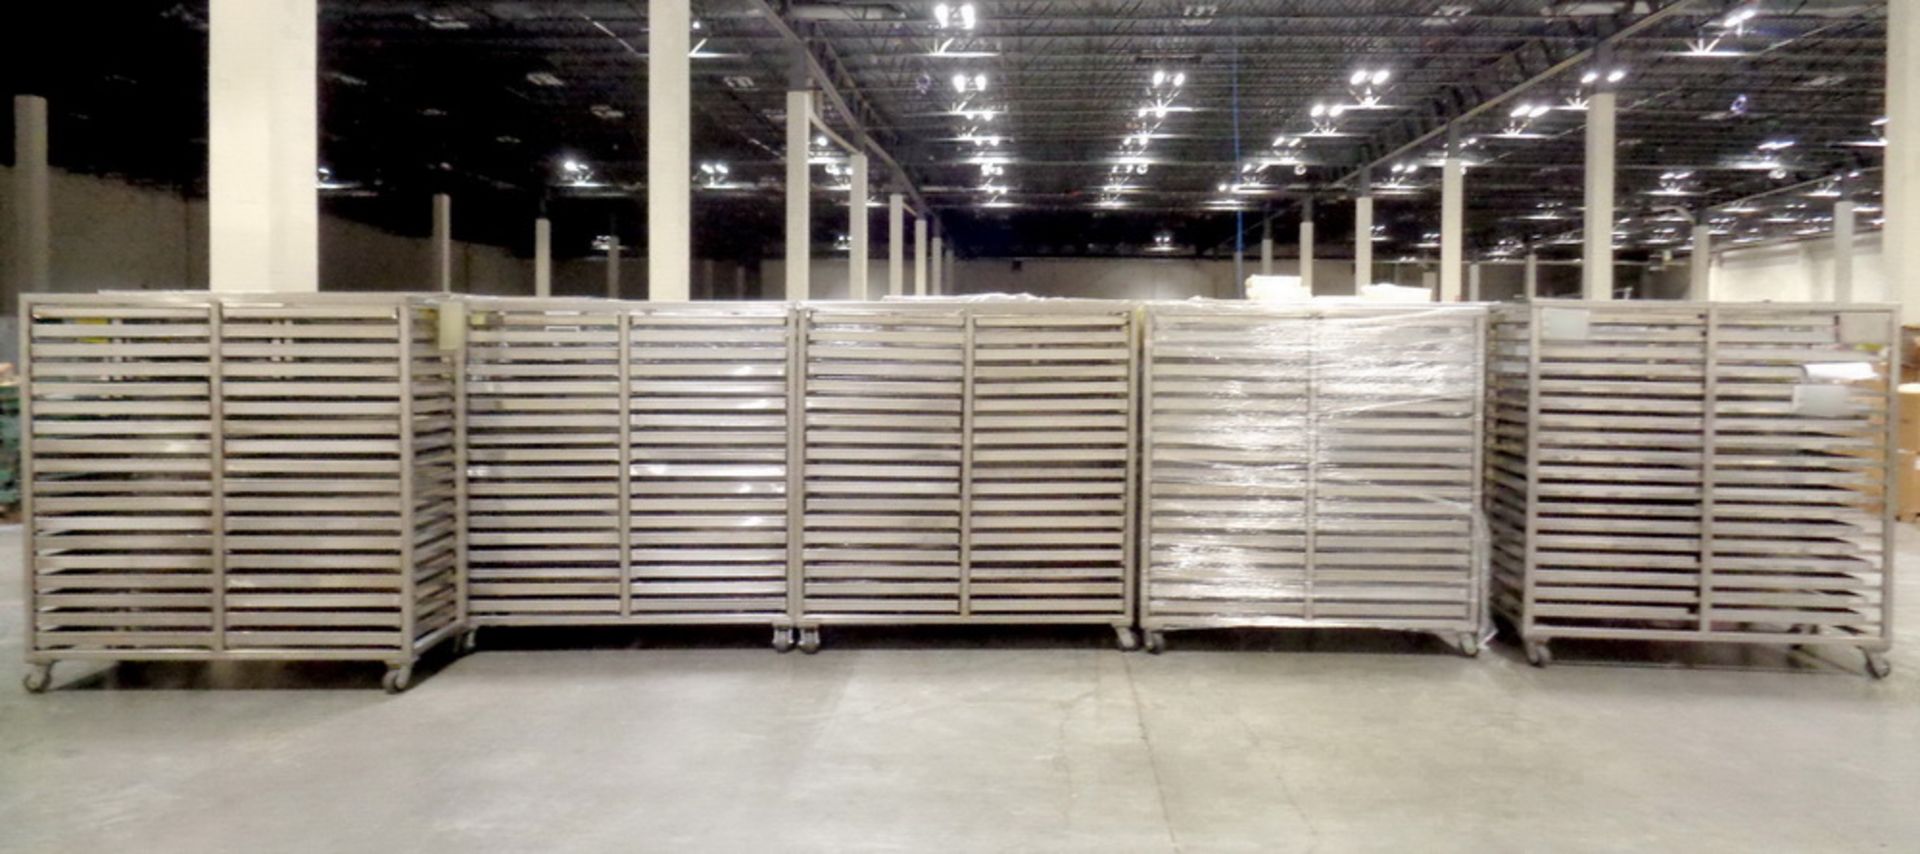 SS Oven Cart/Truck w/ 36 trays, each tray 30" x 30" x 2"